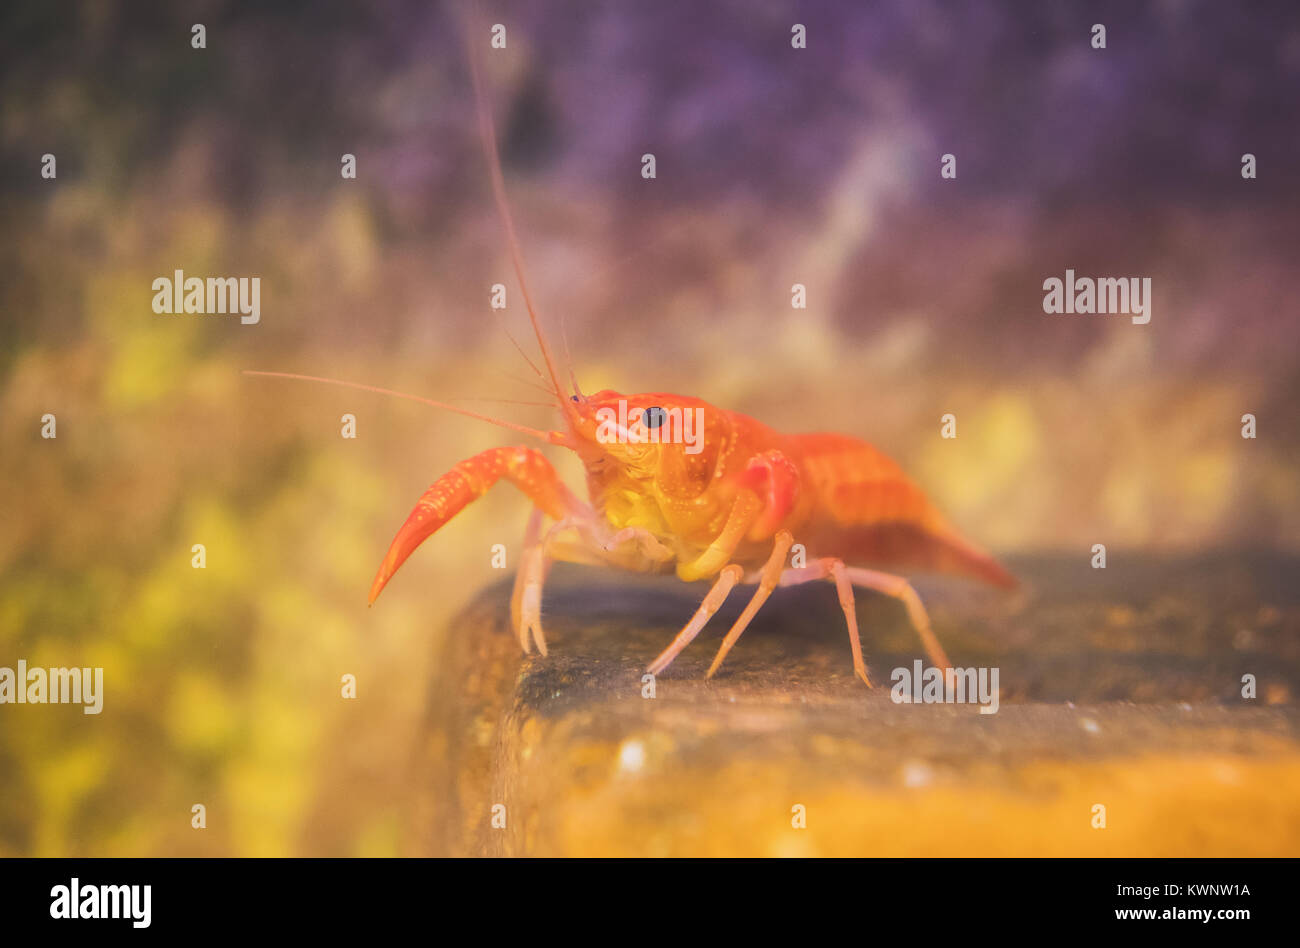 Small crustacean on the bottom of the sea. Stock Photo